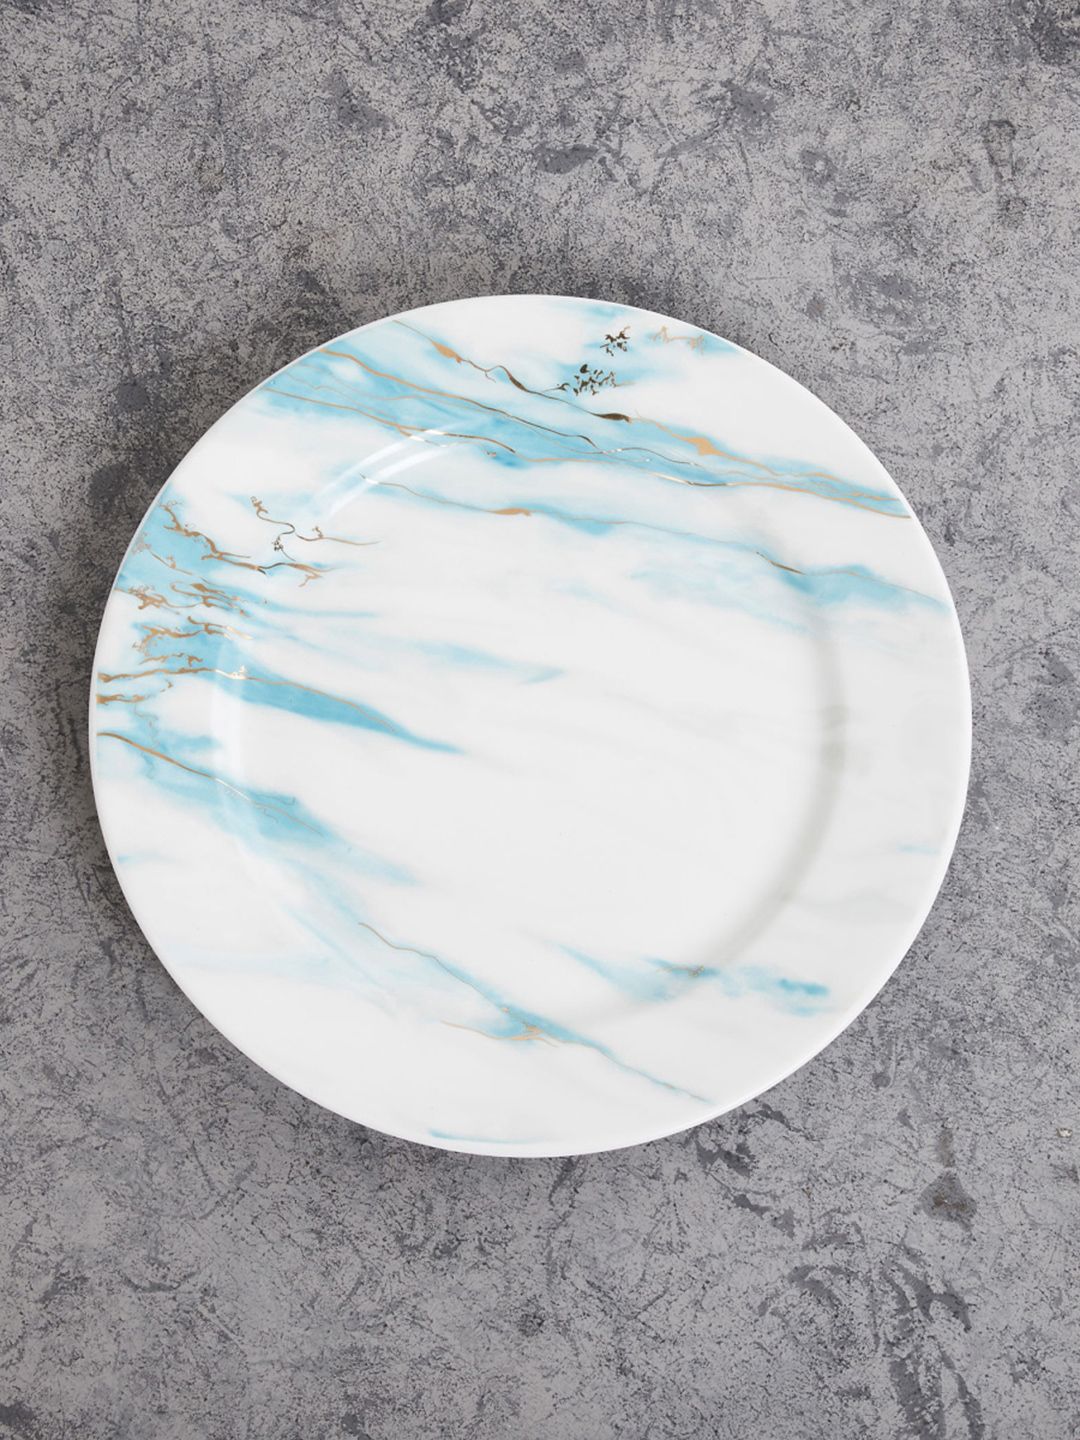 Home Centre White & Blue 1 Pieces Printed Bone China Glossy Plates Price in India